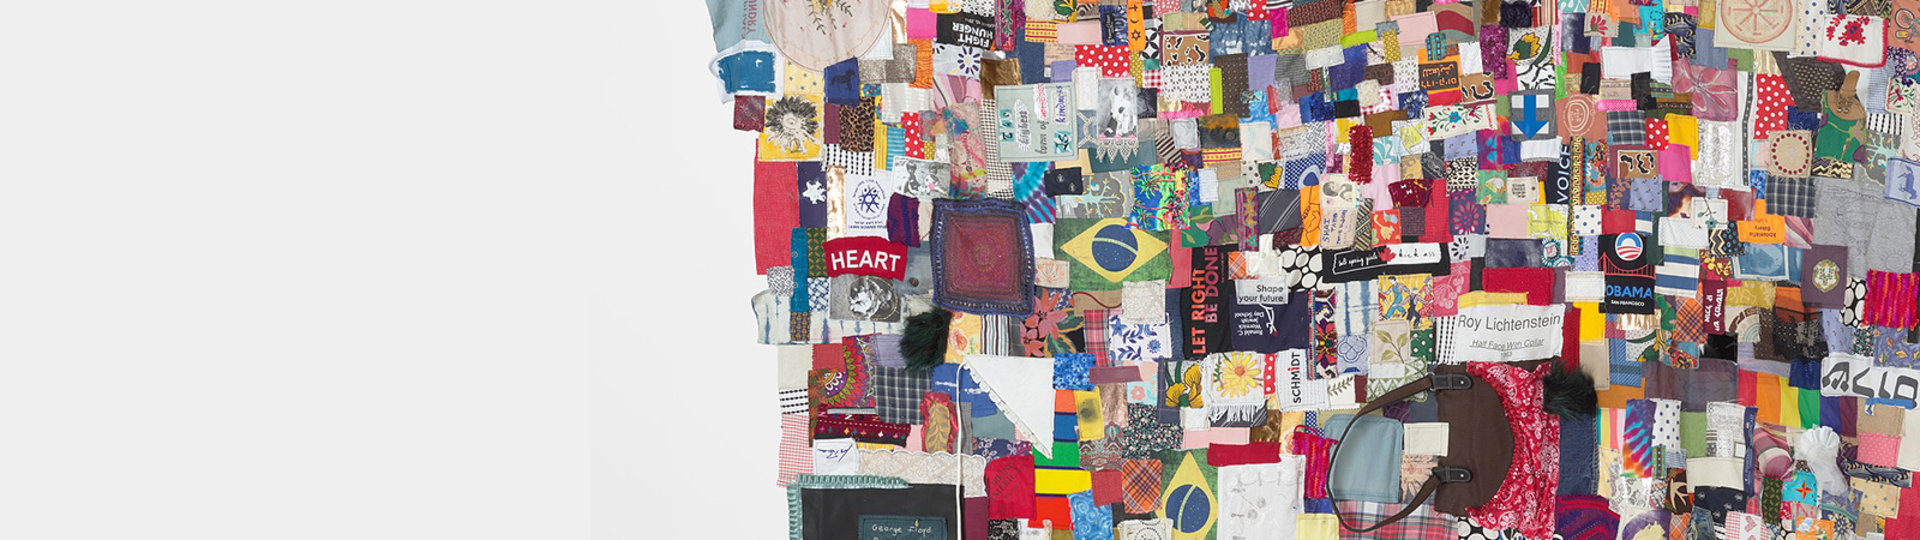 Photo of A community quilt with many different patches